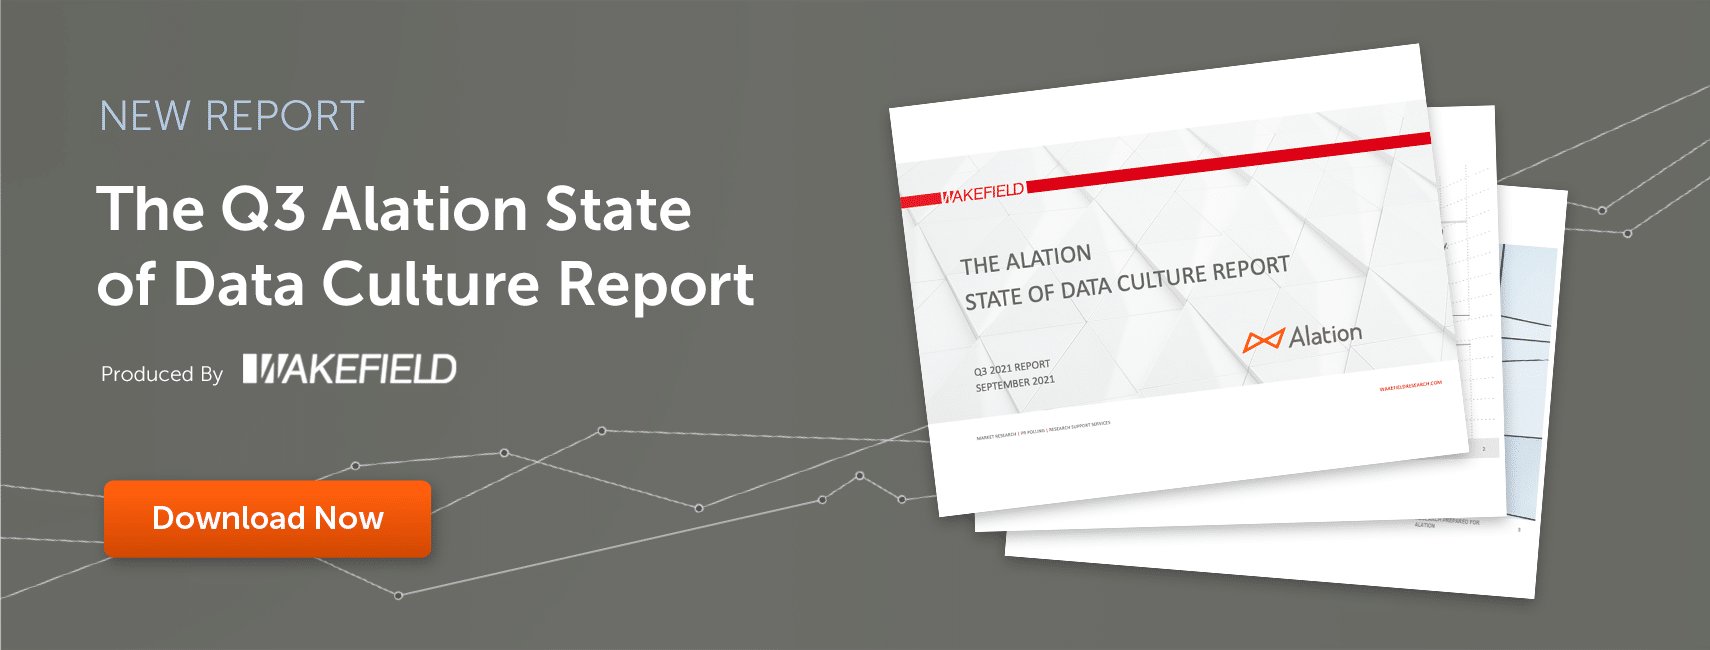 The Alation State of Data Culture Report Q3 2021